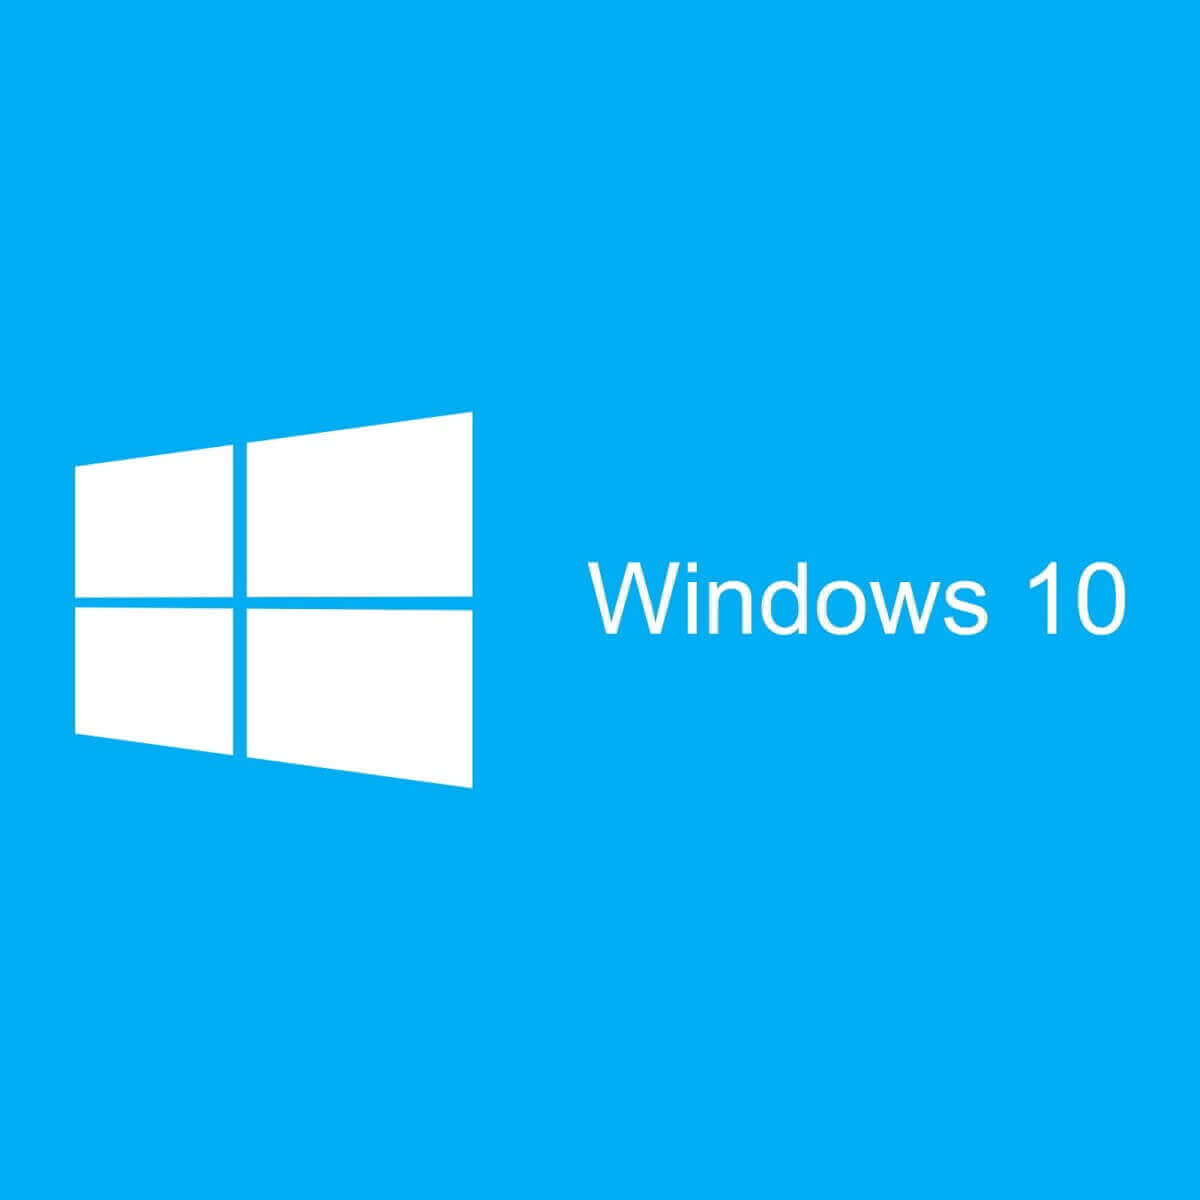 New Windows 10 App Icons Bring More Colour To Your Desktop